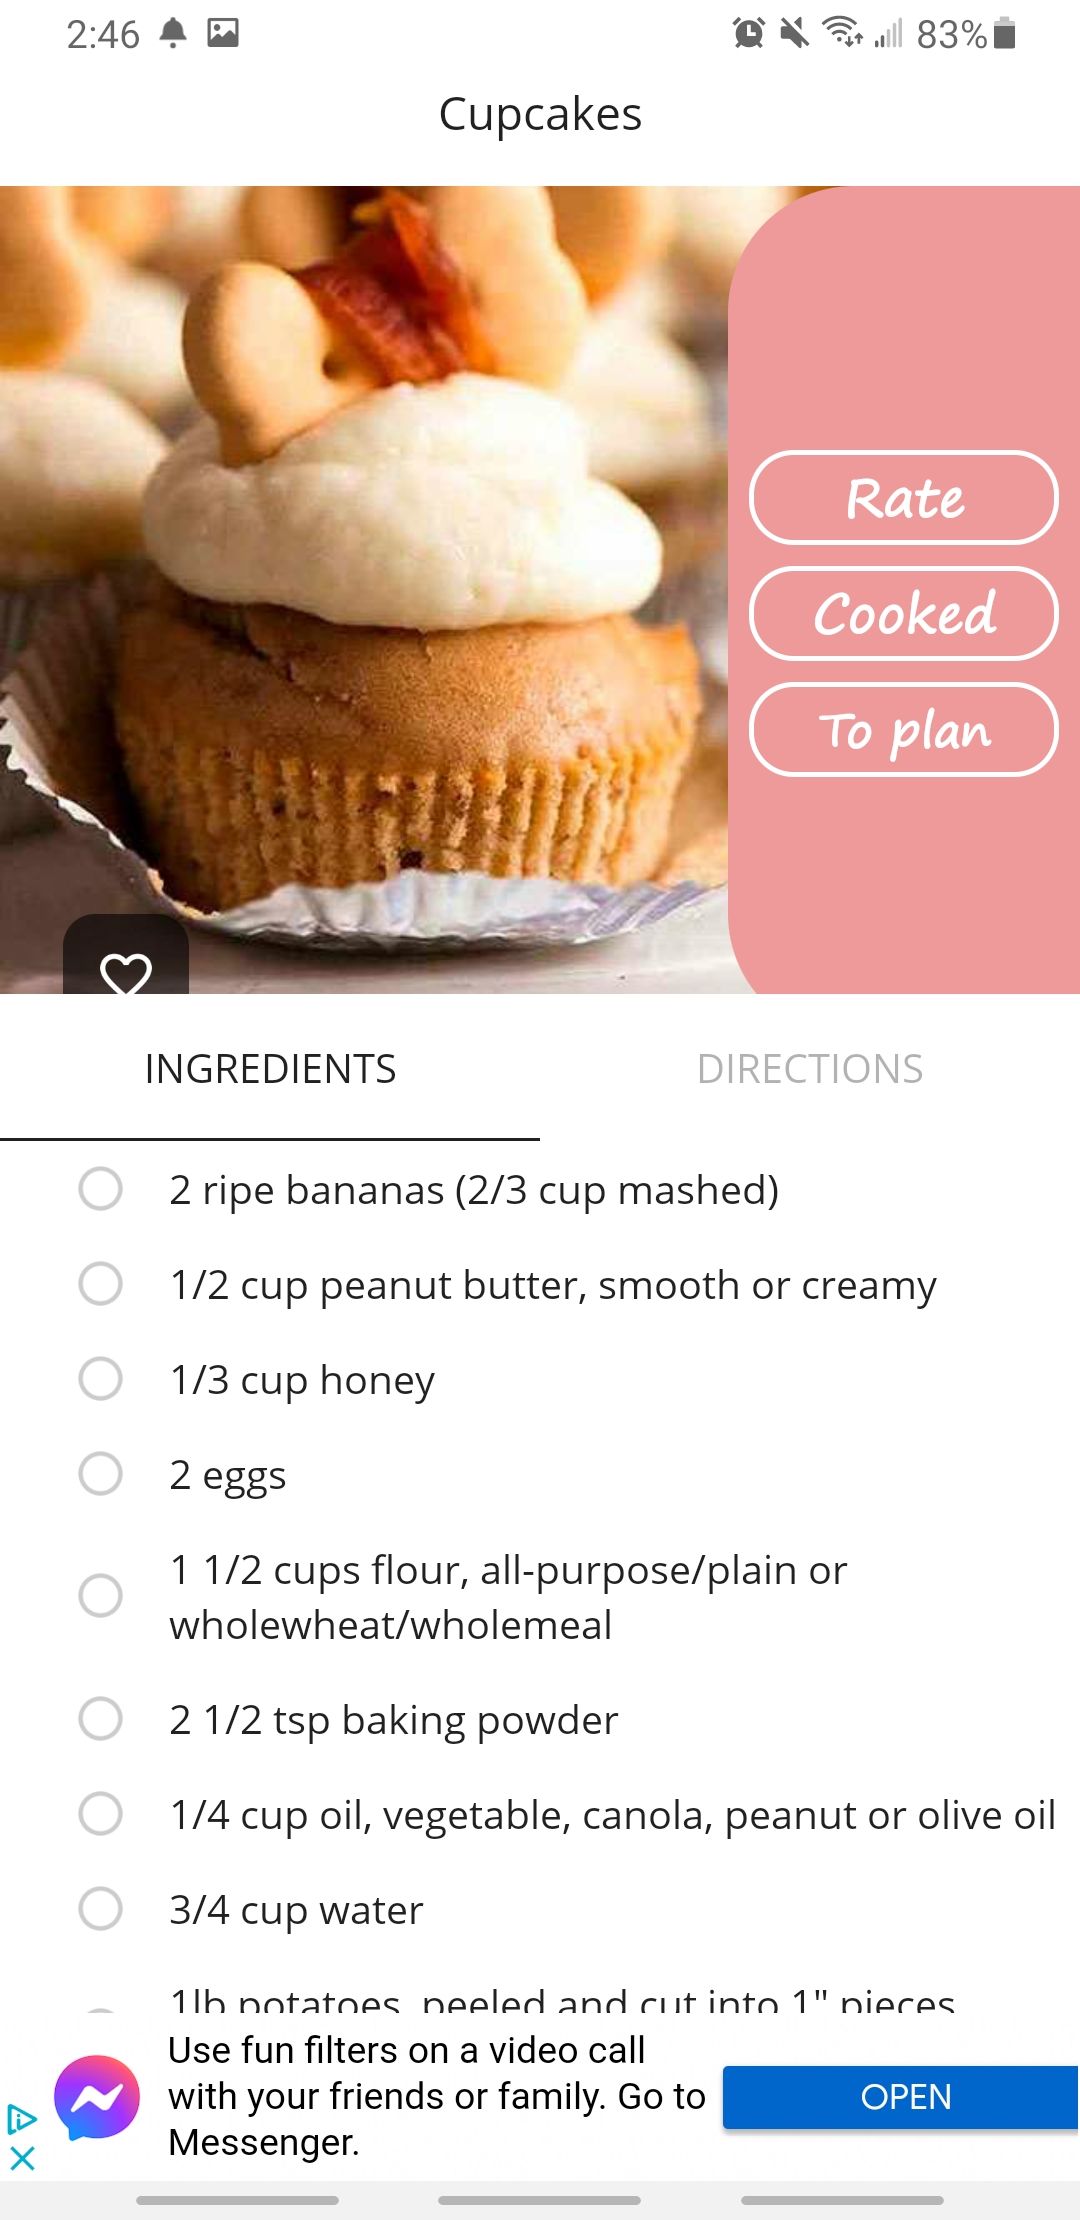 cake and baking recipes app ingredients for cupcakes